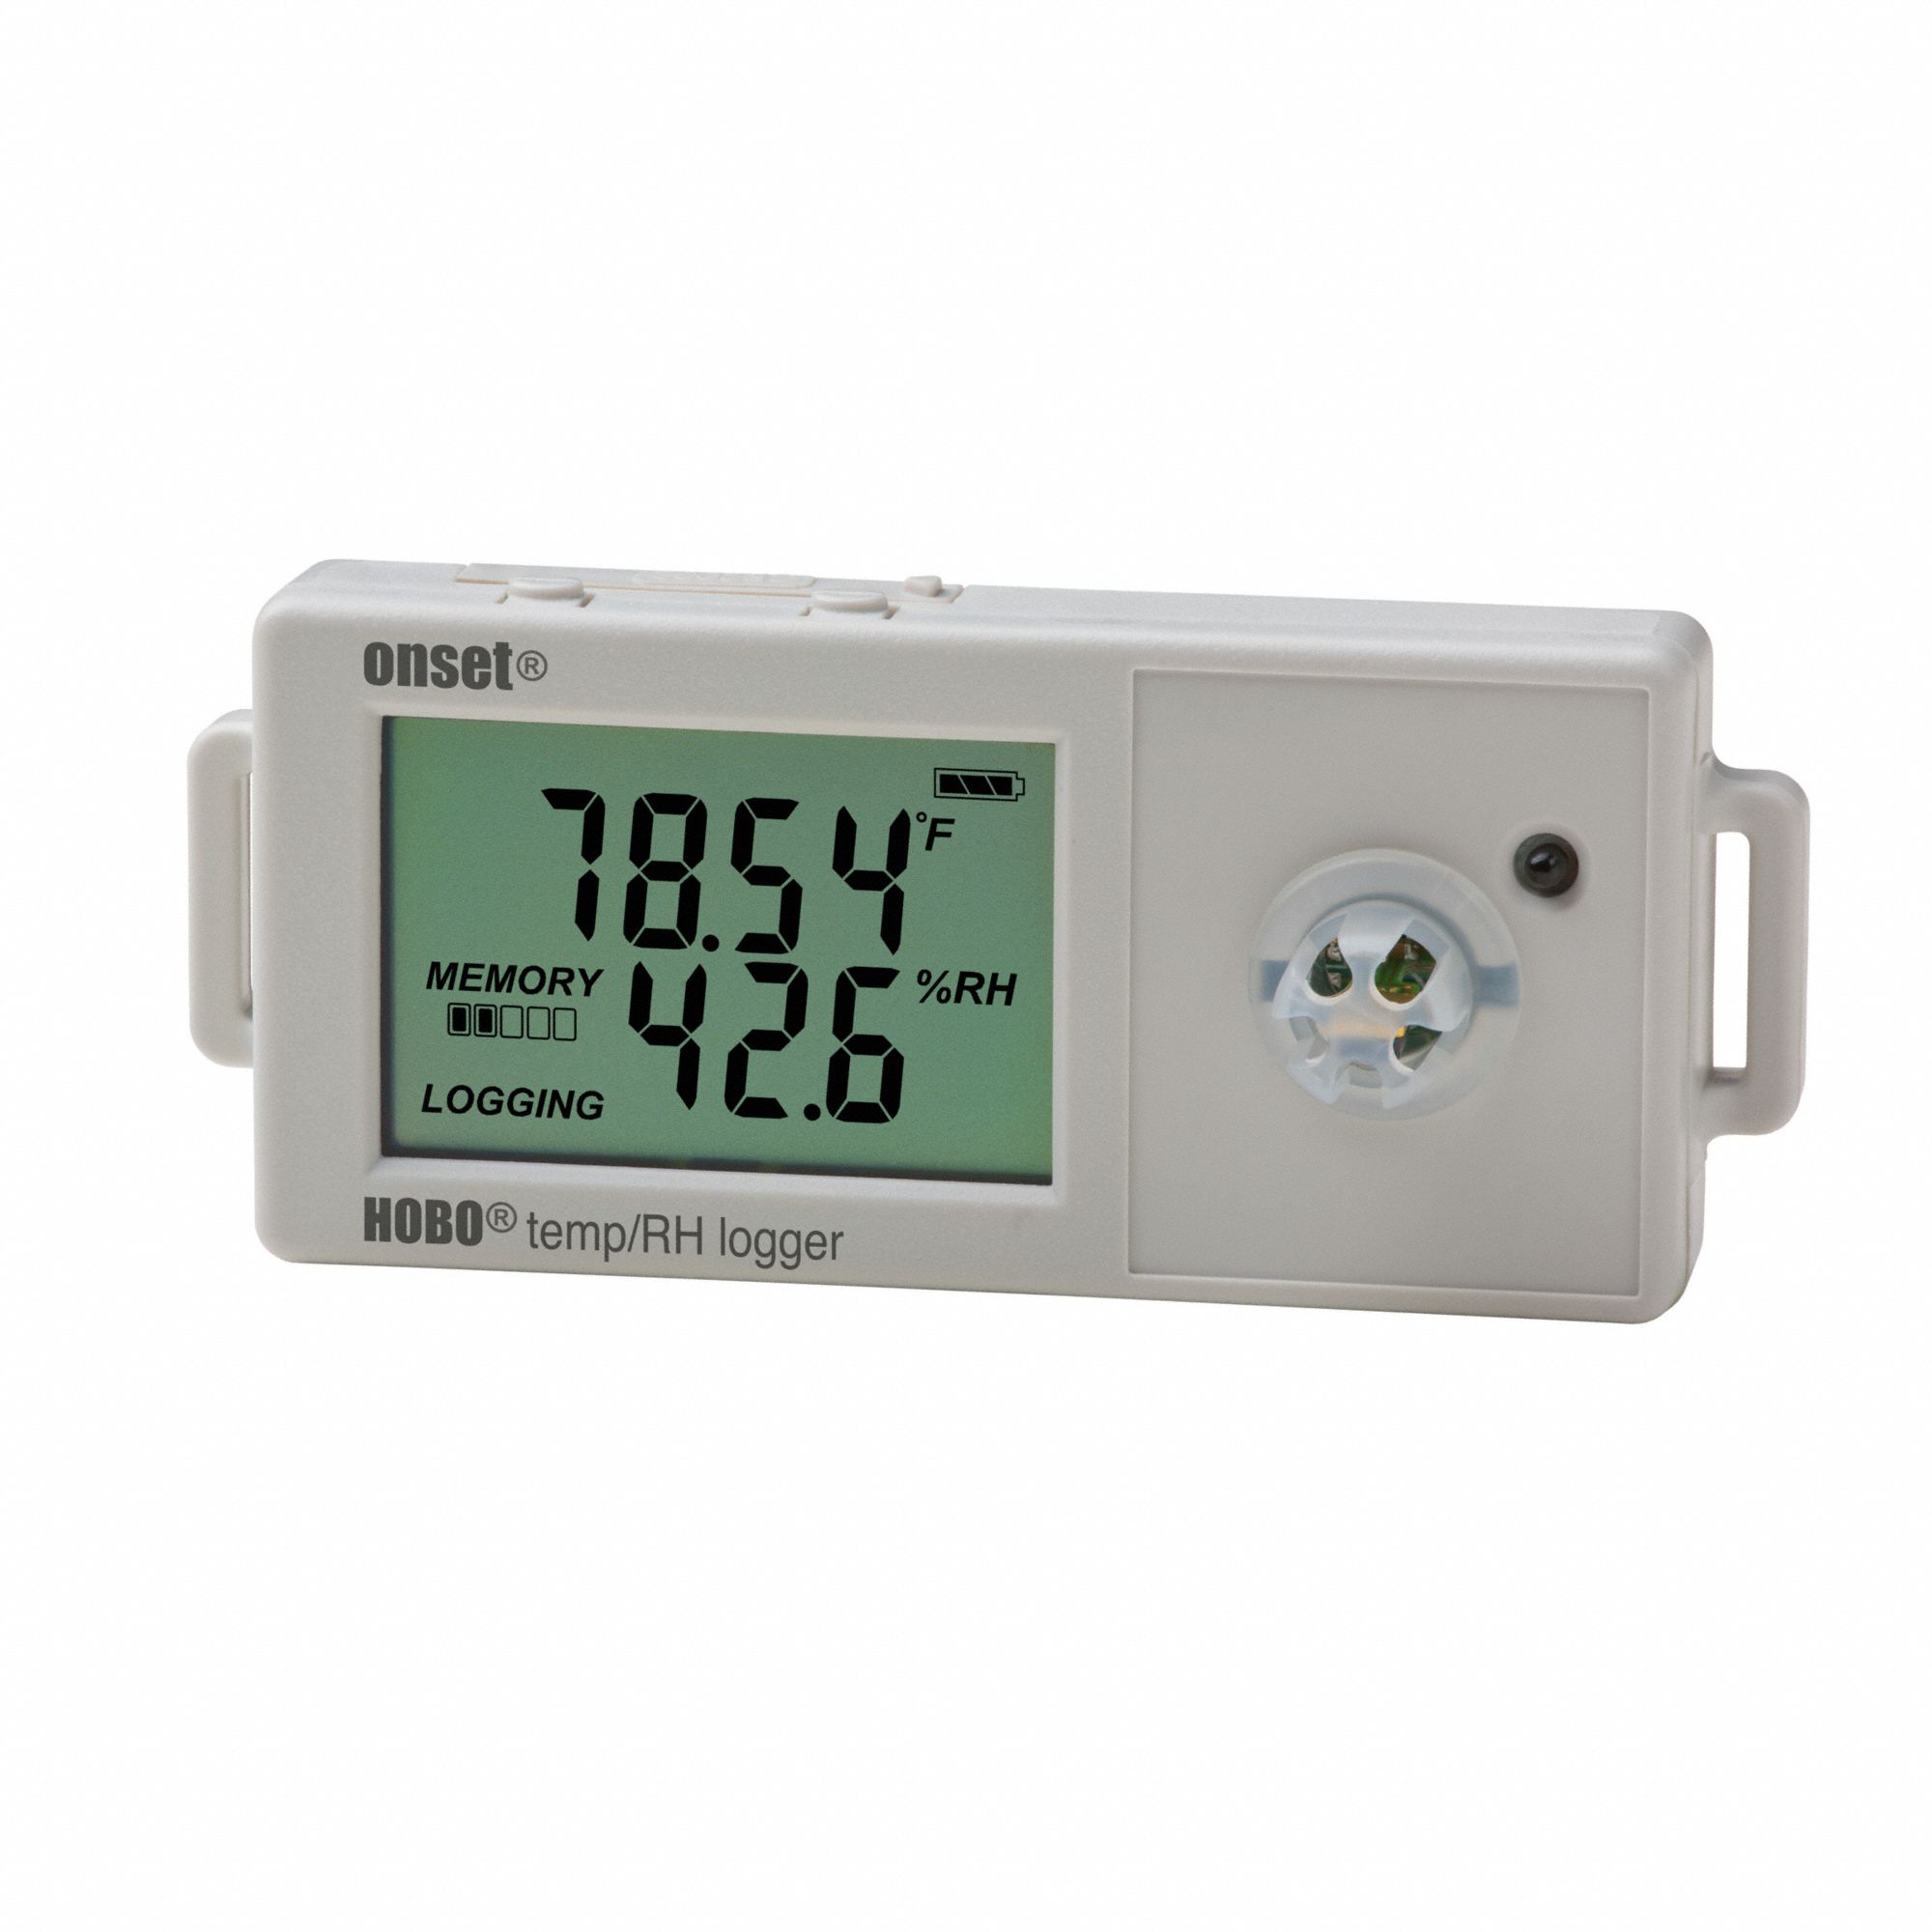 Data Logger: ±2.5% RH from 10% to 90% RH Accuracy, -4° to 158°F, 1 yr Battery Life, USB